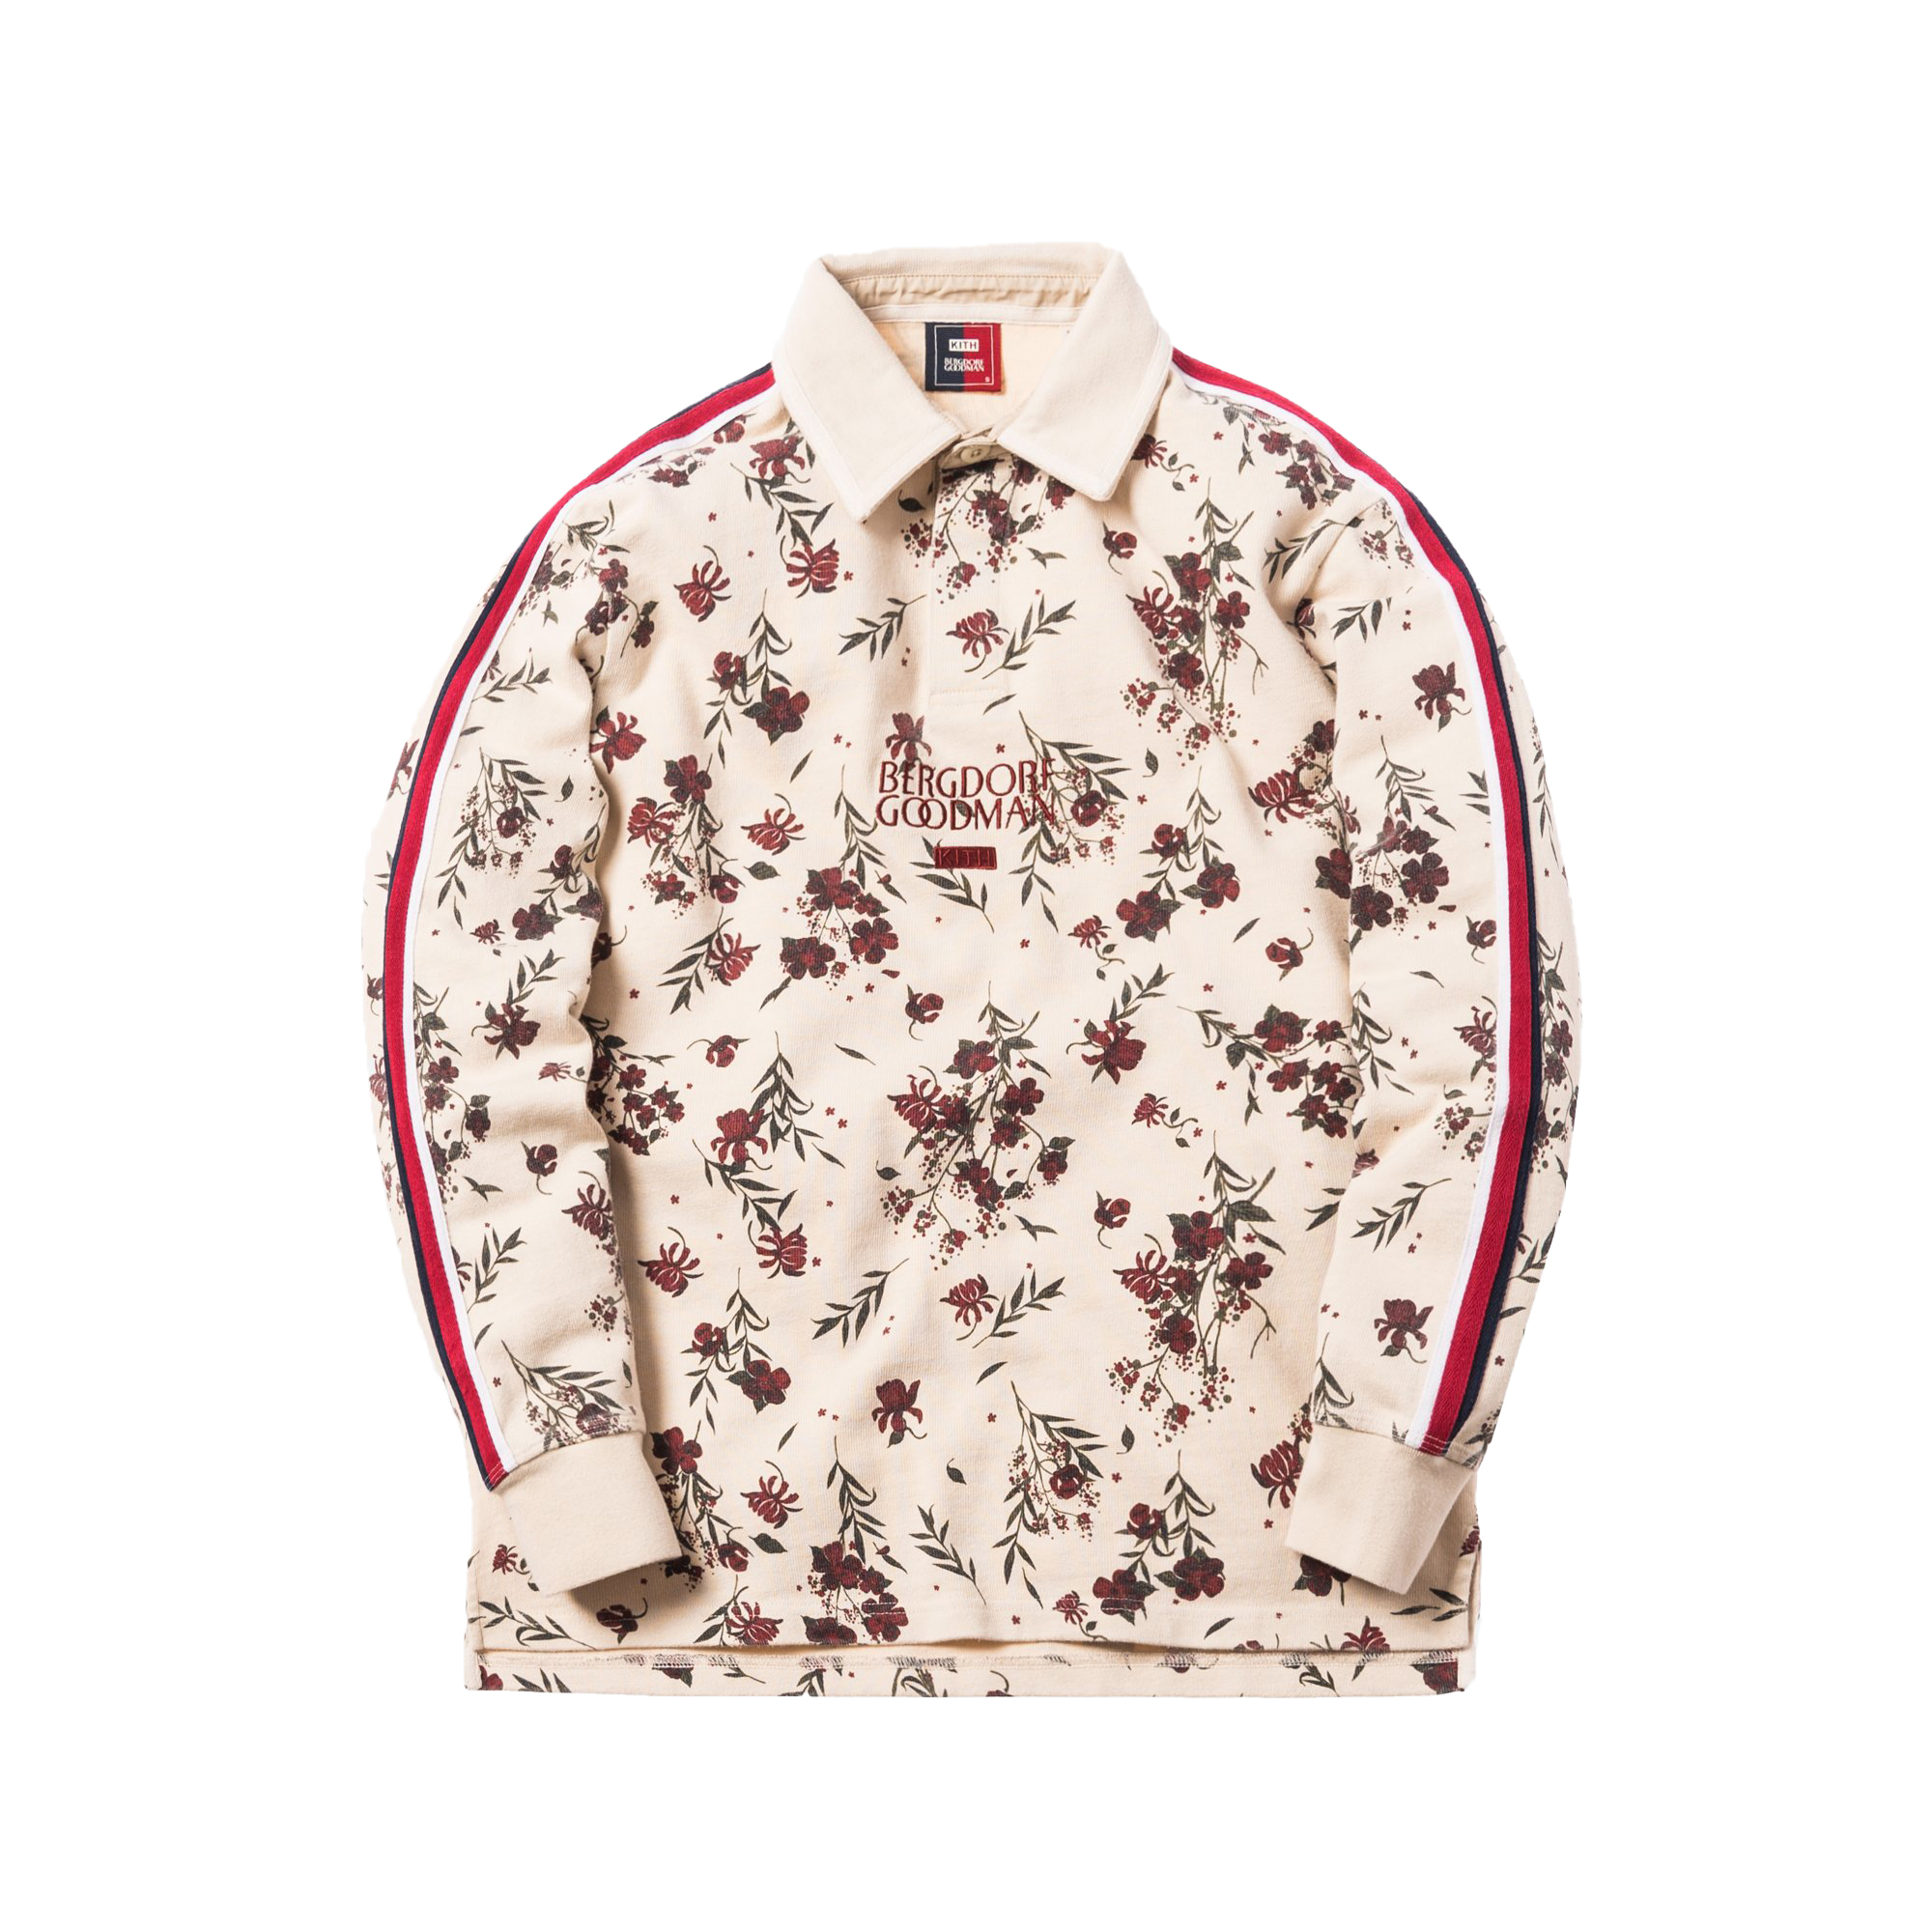 Kith x Bergdorf Goodman Floral Rugby Shirt Off White - FW18 - US